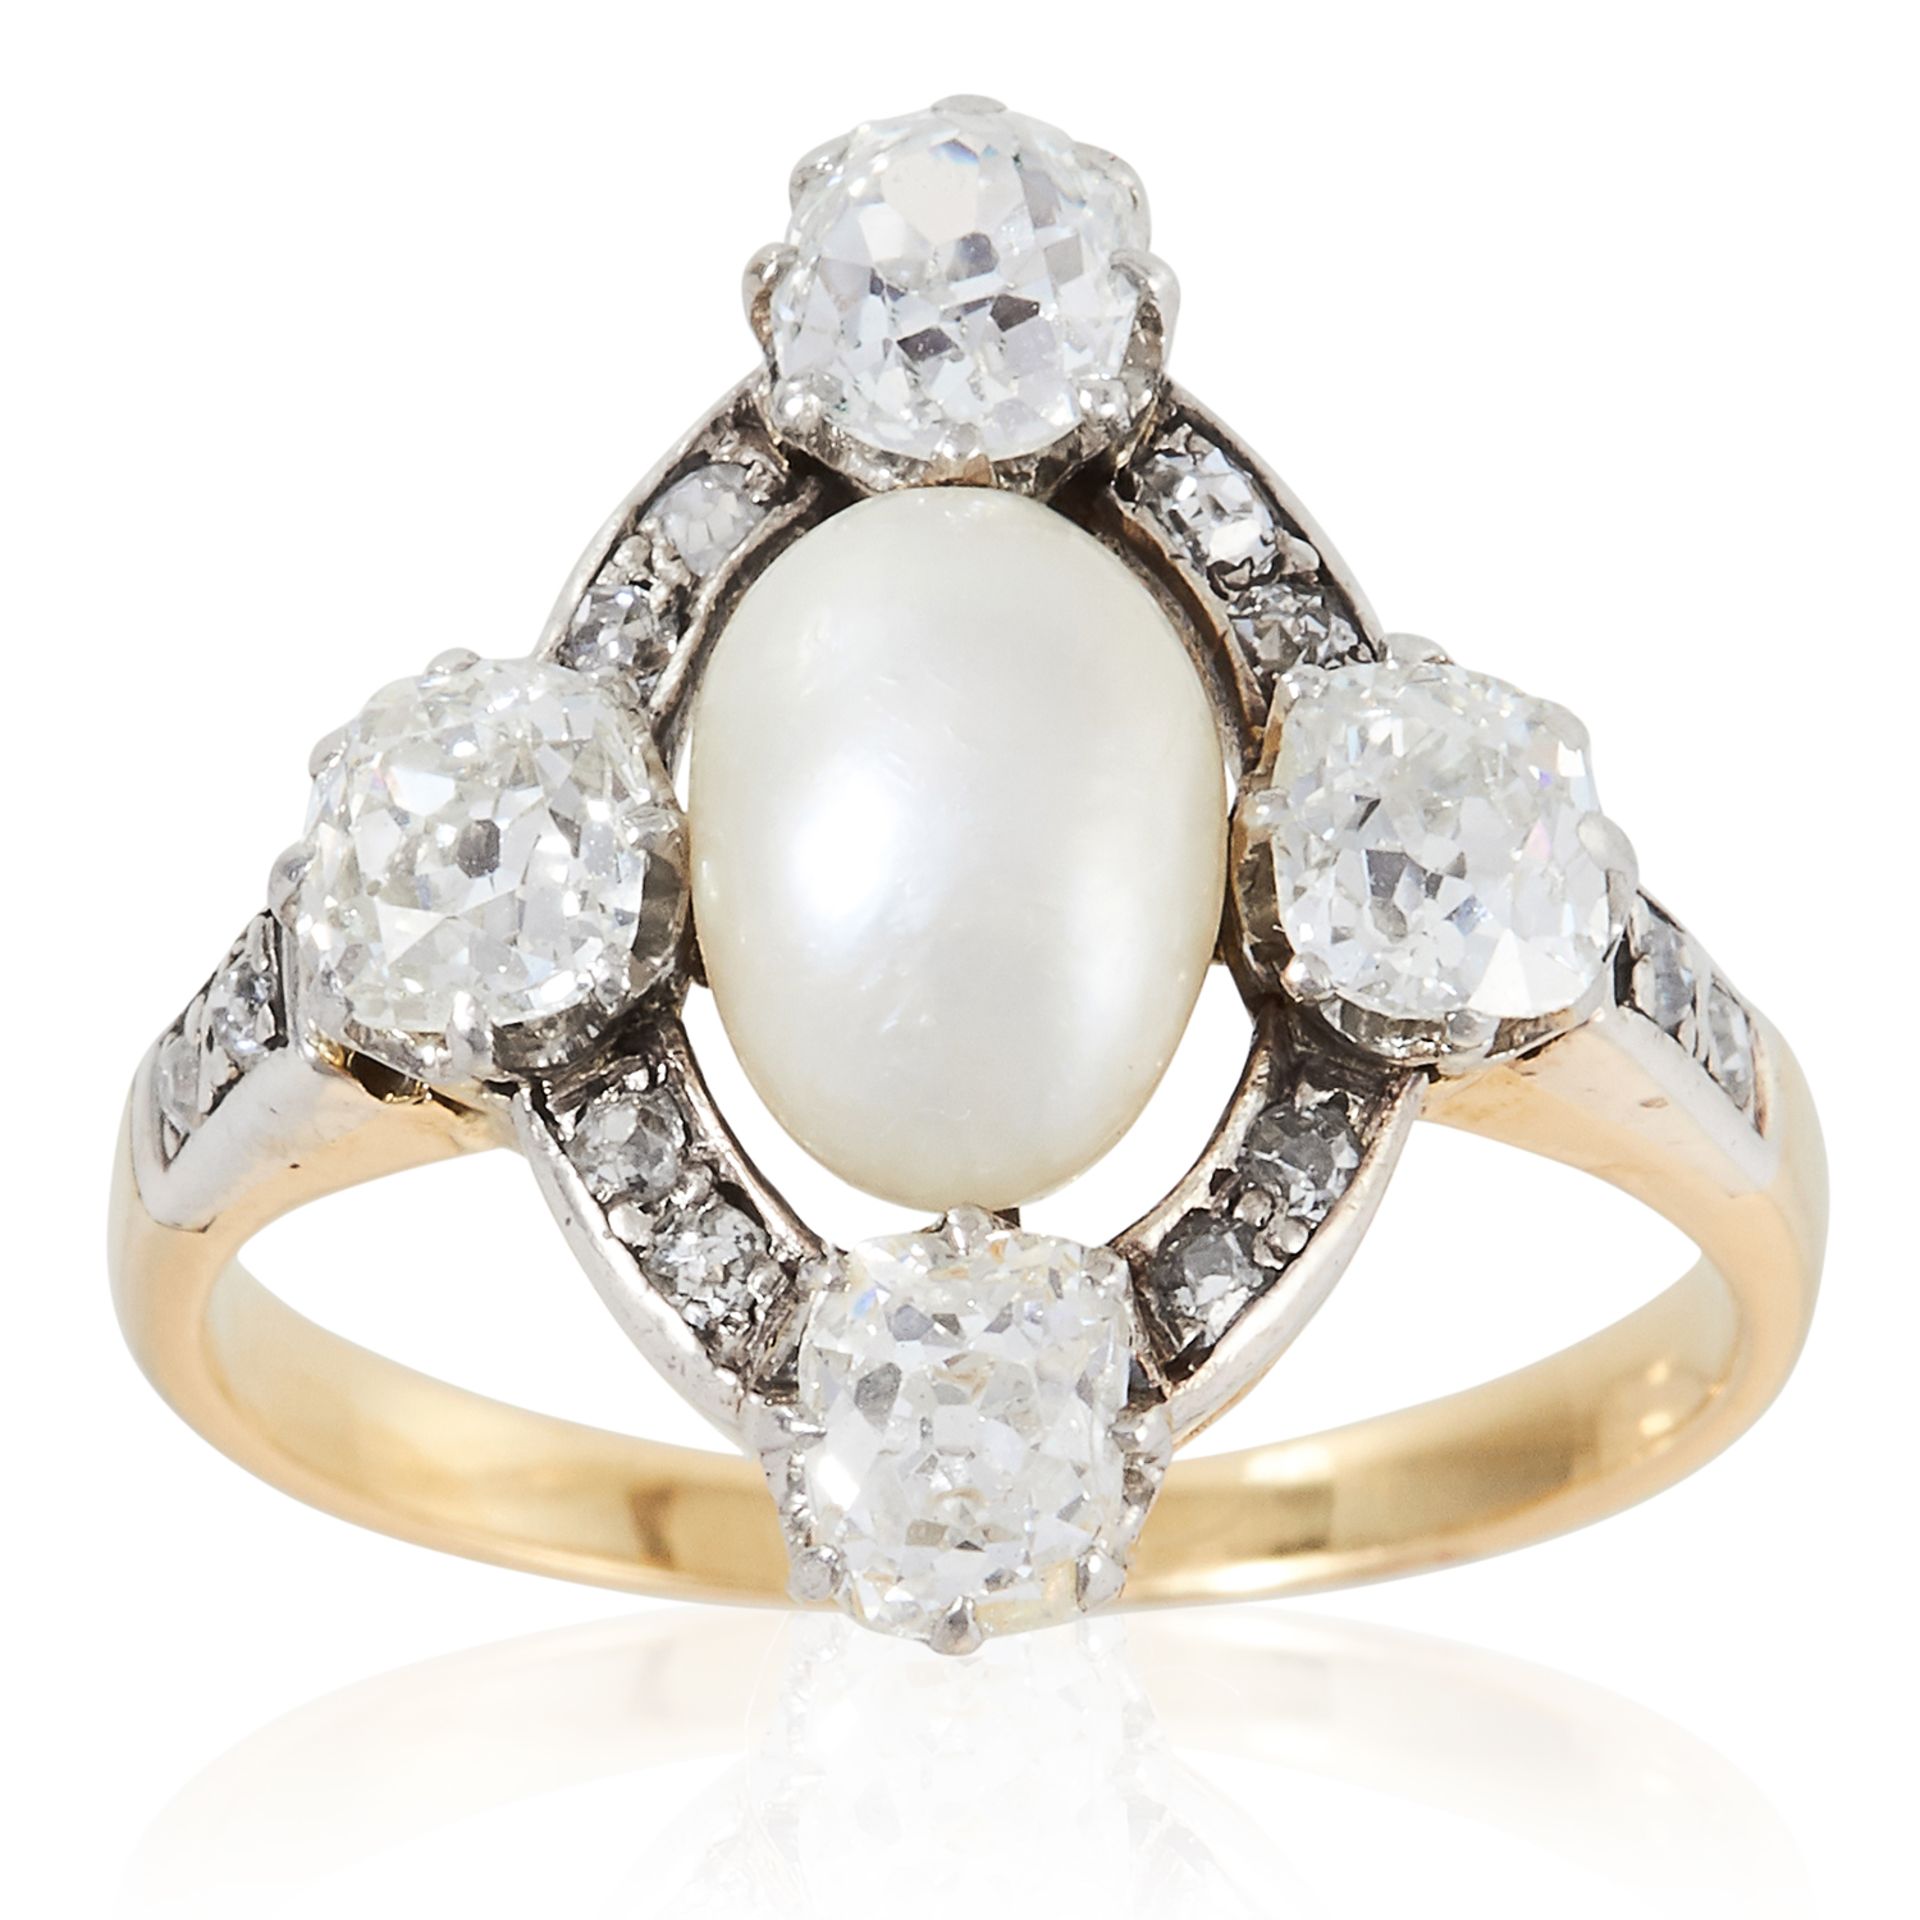 AN ANTIQUE PEARL AND DIAMOND RING in high carat yellow gold, set with a central pearl in a border of